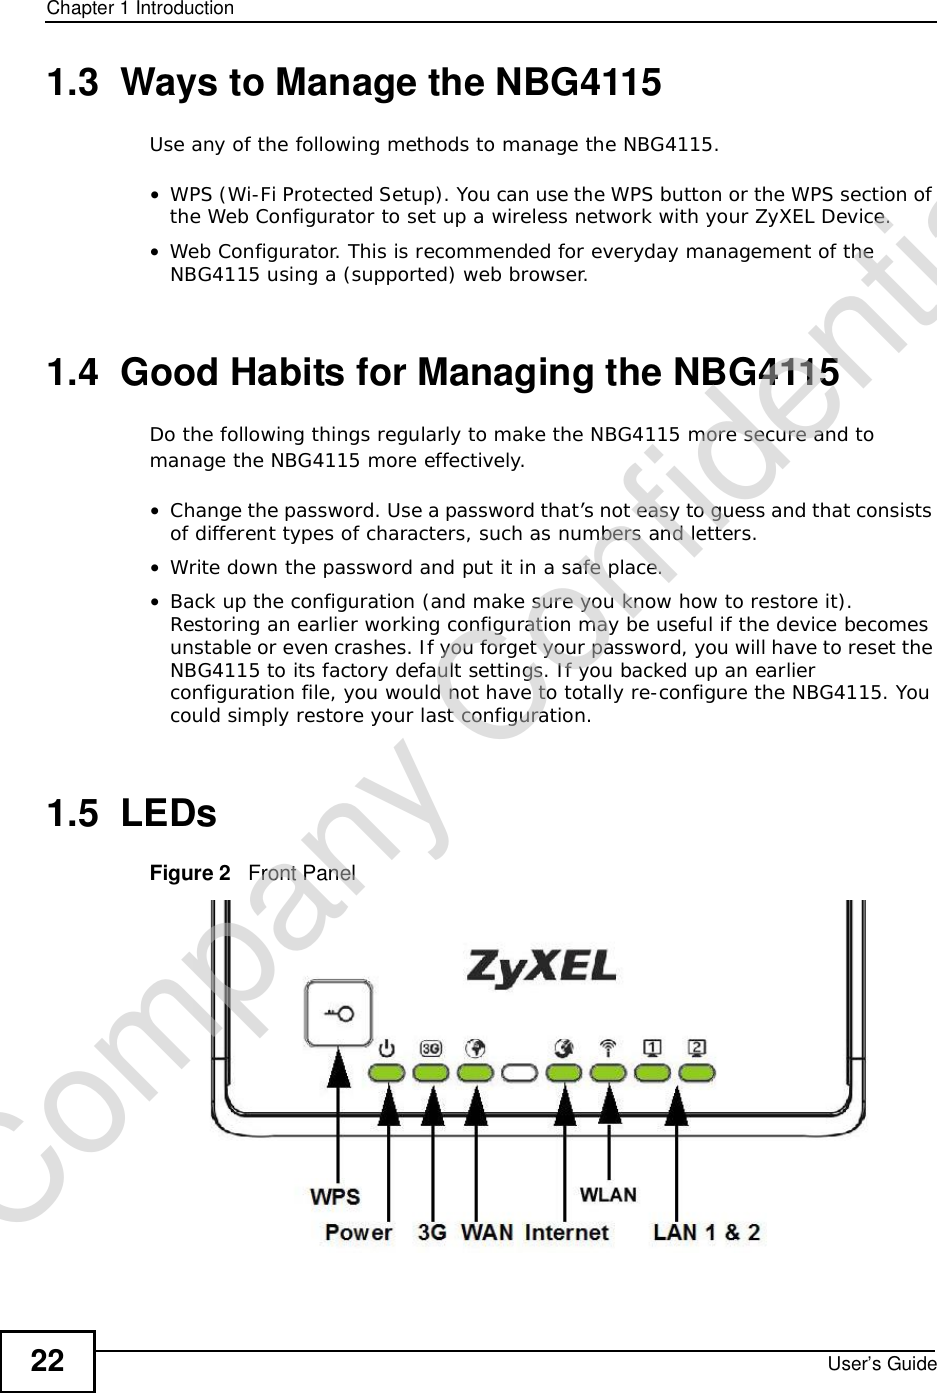 Chapter 1IntroductionUser’s Guide221.3  Ways to Manage the NBG4115Use any of the following methods to manage the NBG4115.•WPS (Wi-Fi Protected Setup). You can use the WPS button or the WPS section of the Web Configurator to set up a wireless network with your ZyXEL Device.•Web Configurator. This is recommended for everyday management of the NBG4115 using a (supported) web browser.1.4  Good Habits for Managing the NBG4115Do the following things regularly to make the NBG4115 more secure and to manage the NBG4115 more effectively.•Change the password. Use a password that’s not easy to guess and that consists of different types of characters, such as numbers and letters.•Write down the password and put it in a safe place.•Back up the configuration (and make sure you know how to restore it). Restoring an earlier working configuration may be useful if the device becomes unstable or even crashes. If you forget your password, you will have to reset the NBG4115 to its factory default settings. If you backed up an earlier configuration file, you would not have to totally re-configure the NBG4115. You could simply restore your last configuration.1.5  LEDsFigure 2   Front PanelCompany Confidential